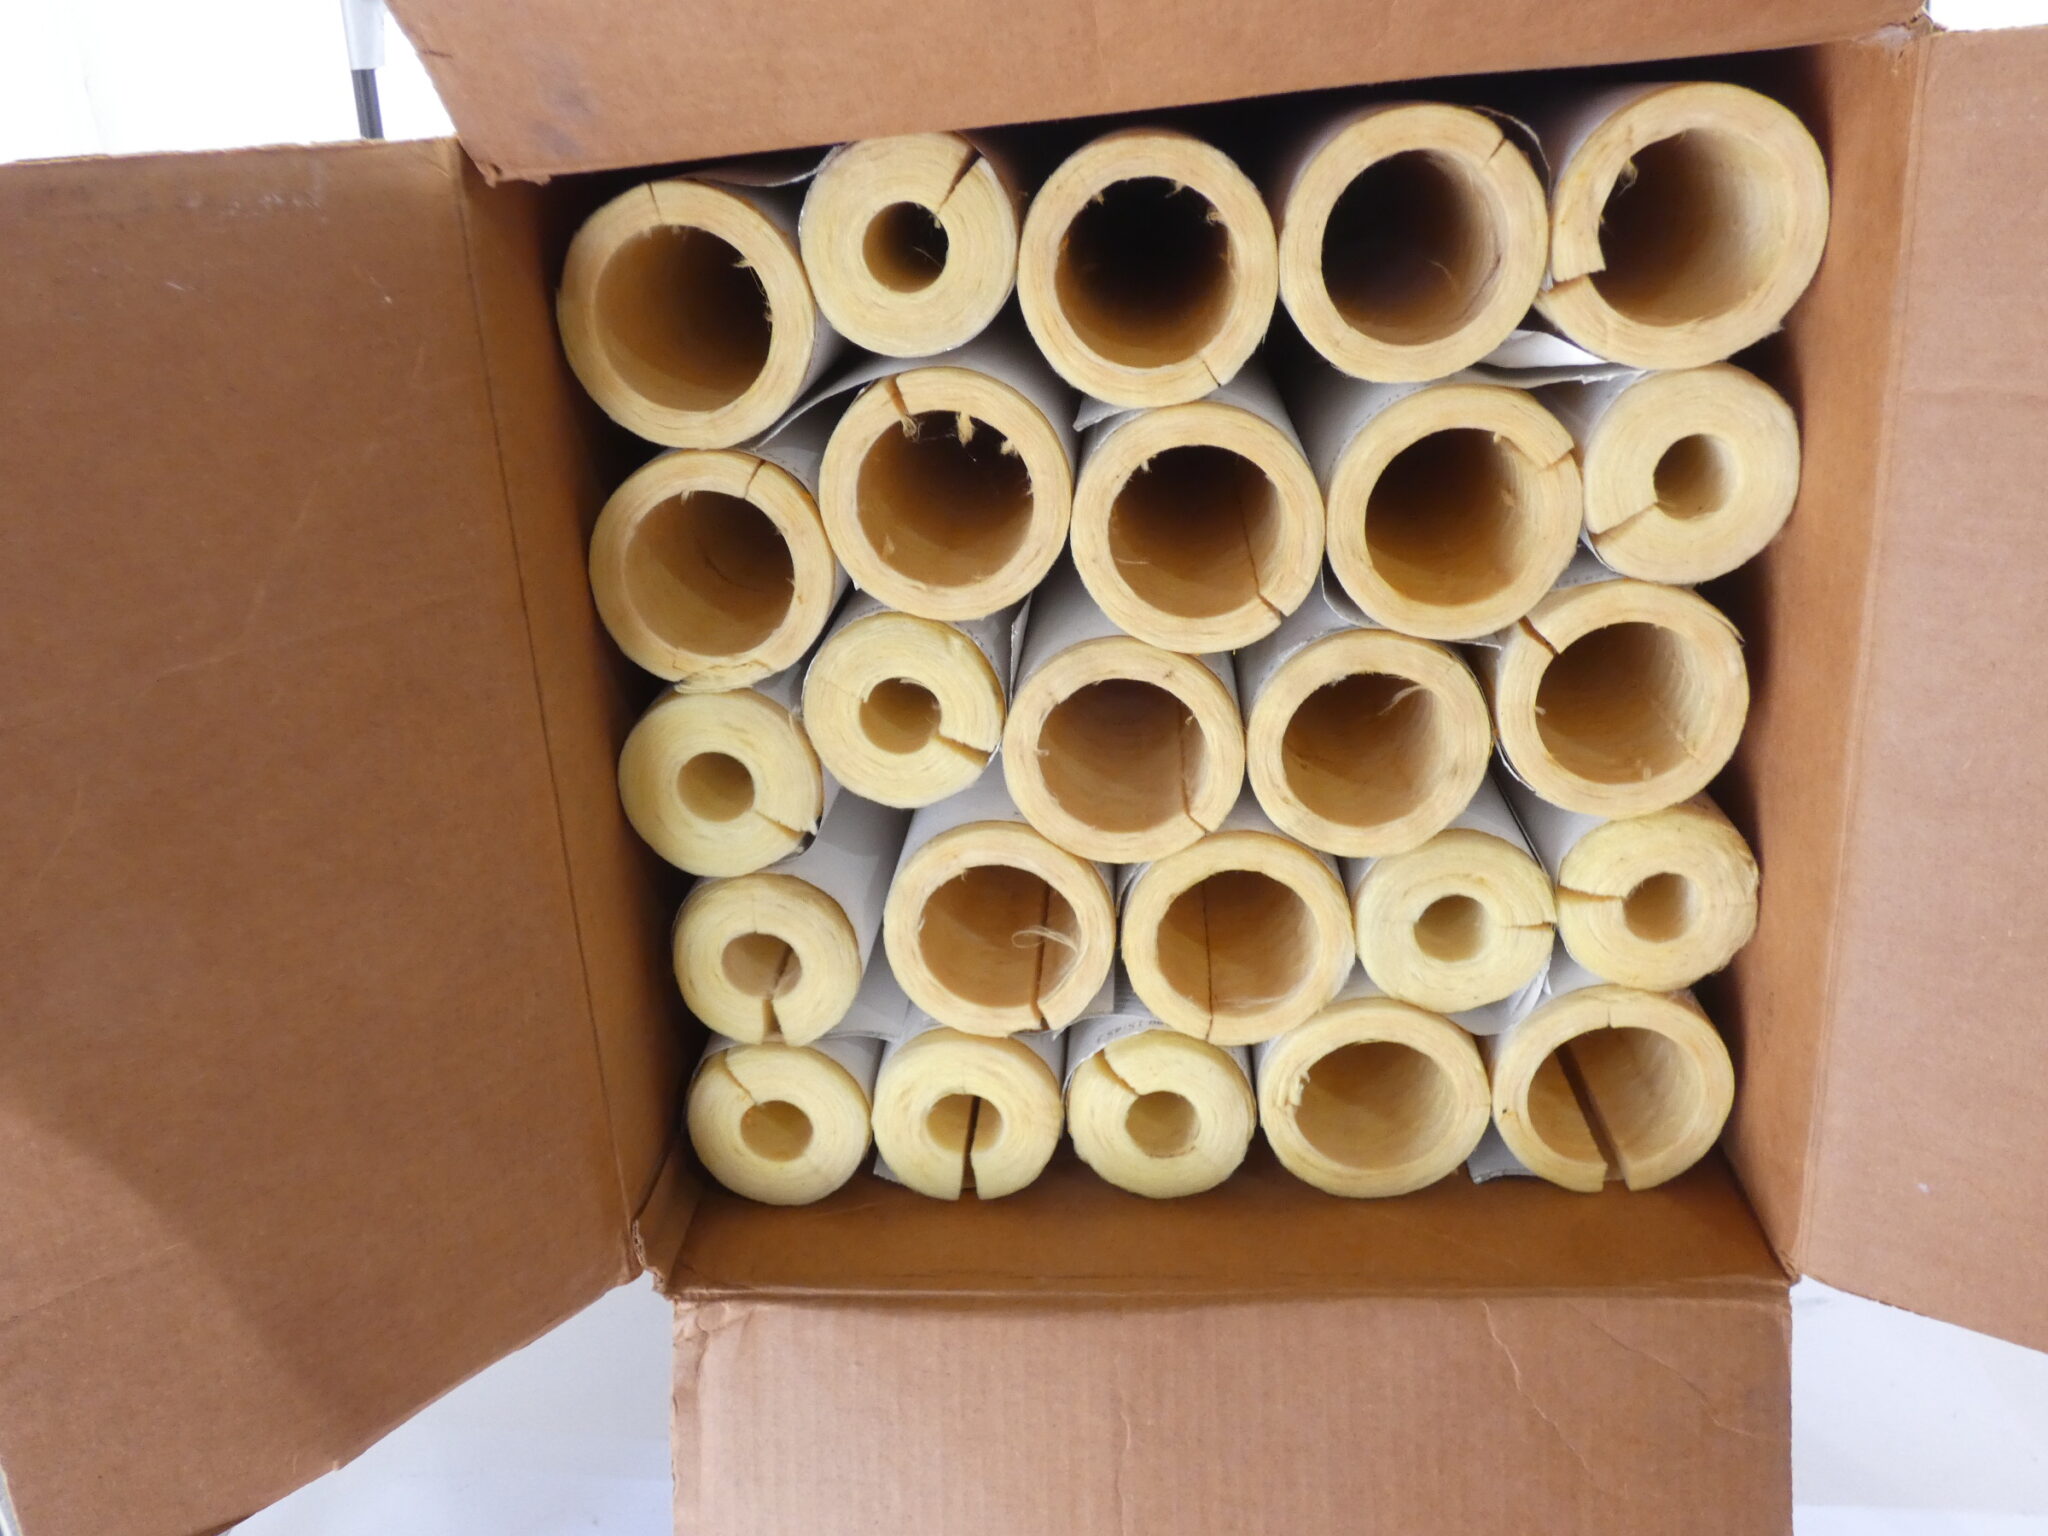 *Lot of 25* Fiberglass Pipe Wraps, 3/4" or 1-1/8" x 1" and 2-1/2" - NEW Surplus!